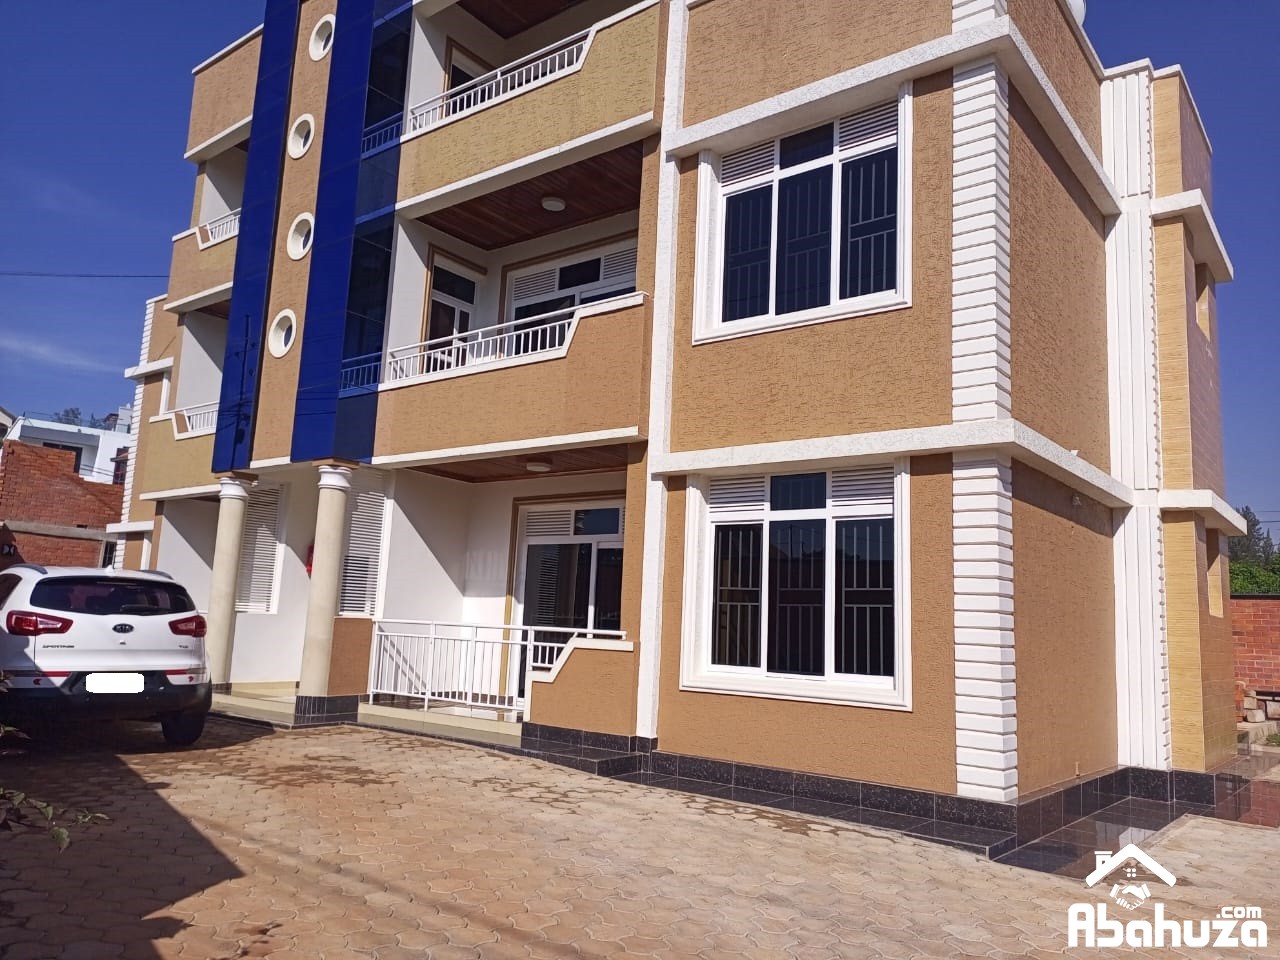 A FURNISHED 2 BEDROOM APARTMENT FOR RENT IN KIGALI AT KICUKIRO